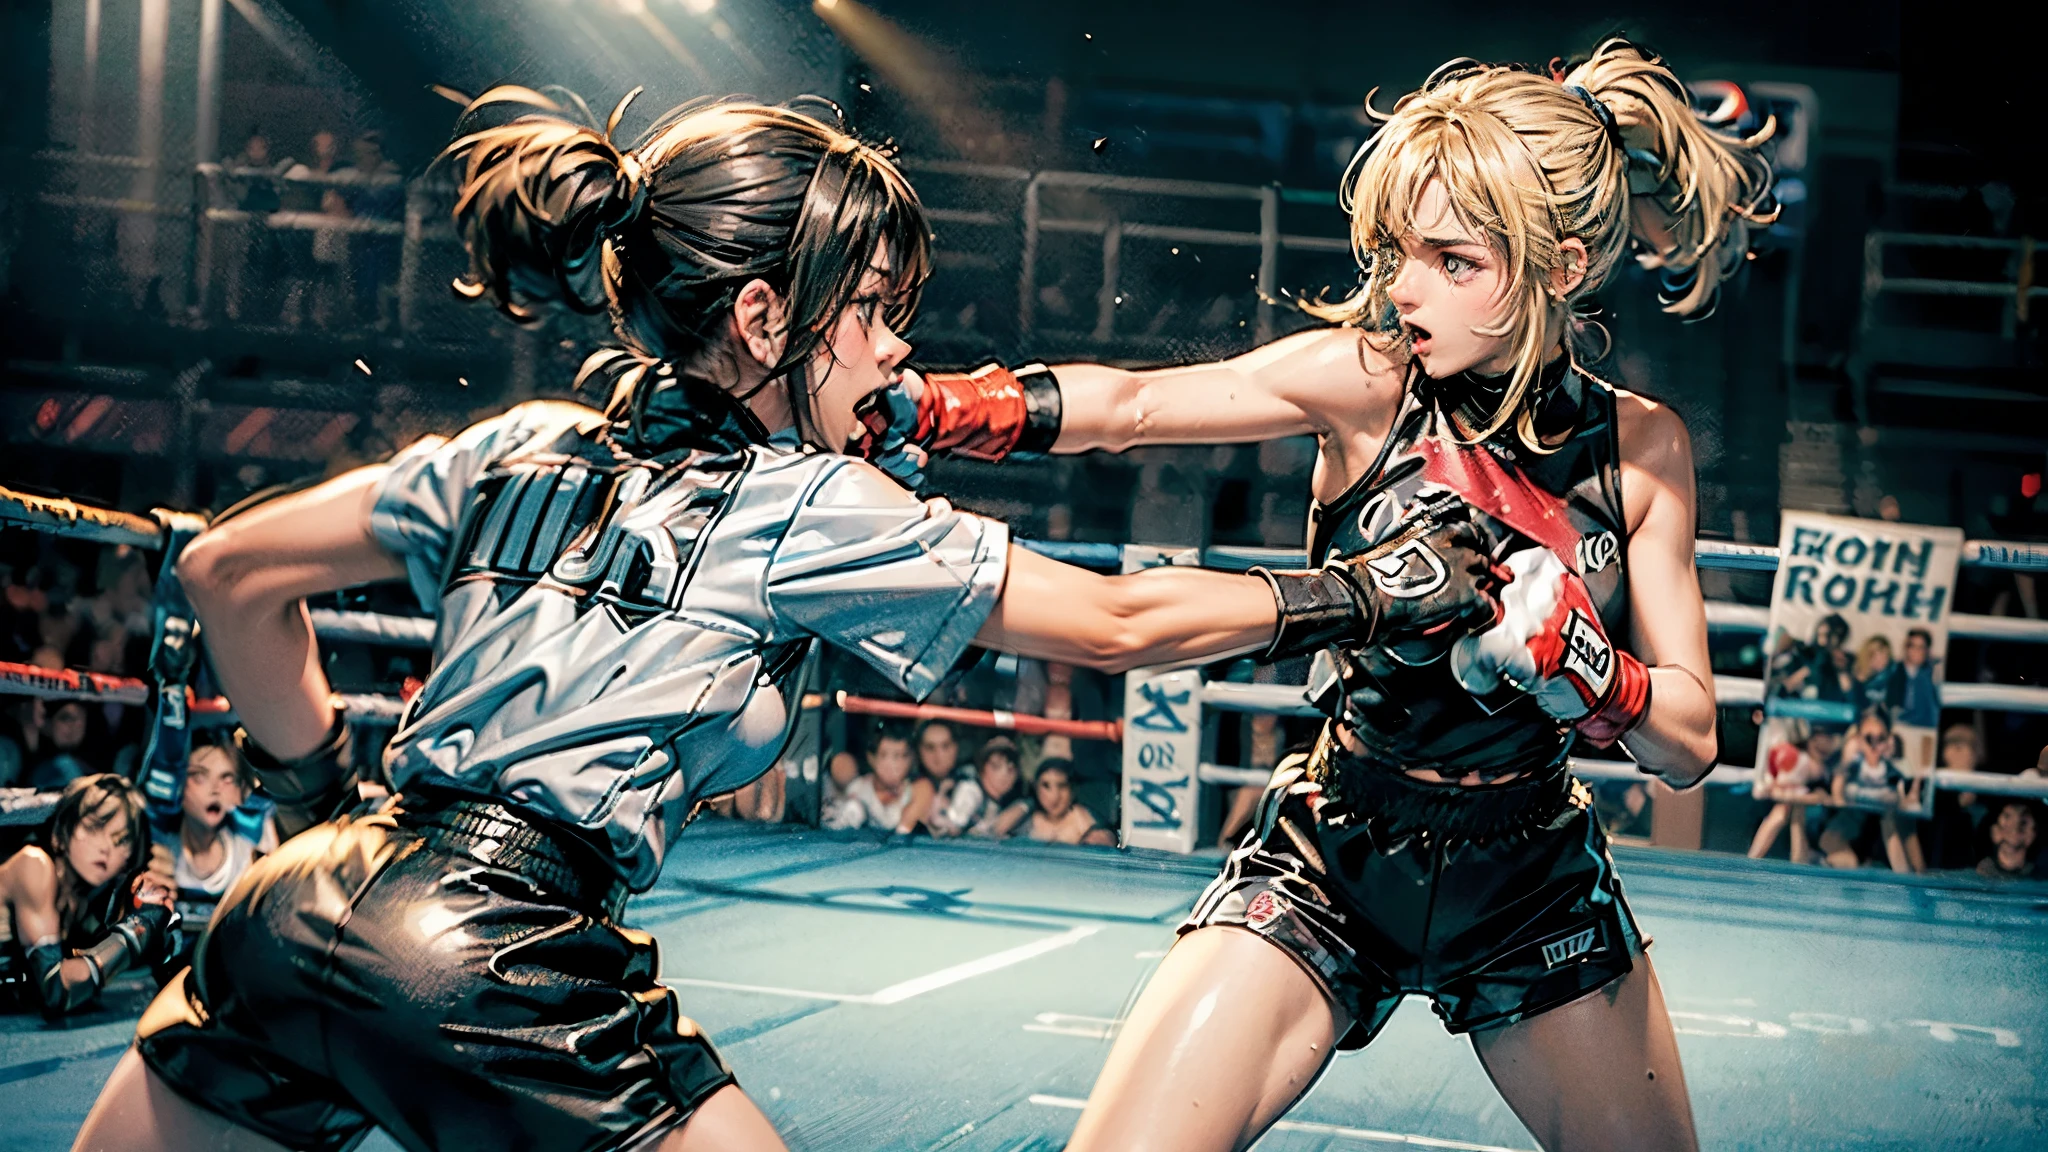 8k wallpaper of extremely detailed CG unit, ​masterpiece, hight resolution, top-quality, top-quality real texture skin,hyper realisitic, digitial painting,increase the resolution,RAW photosbest qualtiy,highly detailed,the wallpaper,two teen women,two teen women are hard pancing each other at boxing fight,2women,teen,cute,kawaii,hair floating,messy hair,blonde hair and dark hair,messy hair,pony tail hair and short hair,skin color white,eye color blue or dark,eyes shining,big eyes,breast,sports wear,angry face,punching each other,(boxing gloves),(dynamic pose:1.2),(dynamic angle:1.4),sweat, BREAK ,(motion blur on gloves:1.8),boxing ring,1boxing referee,audiences,(when drawing the hand please draw them very correctly for sure),[nsfw:2.0],